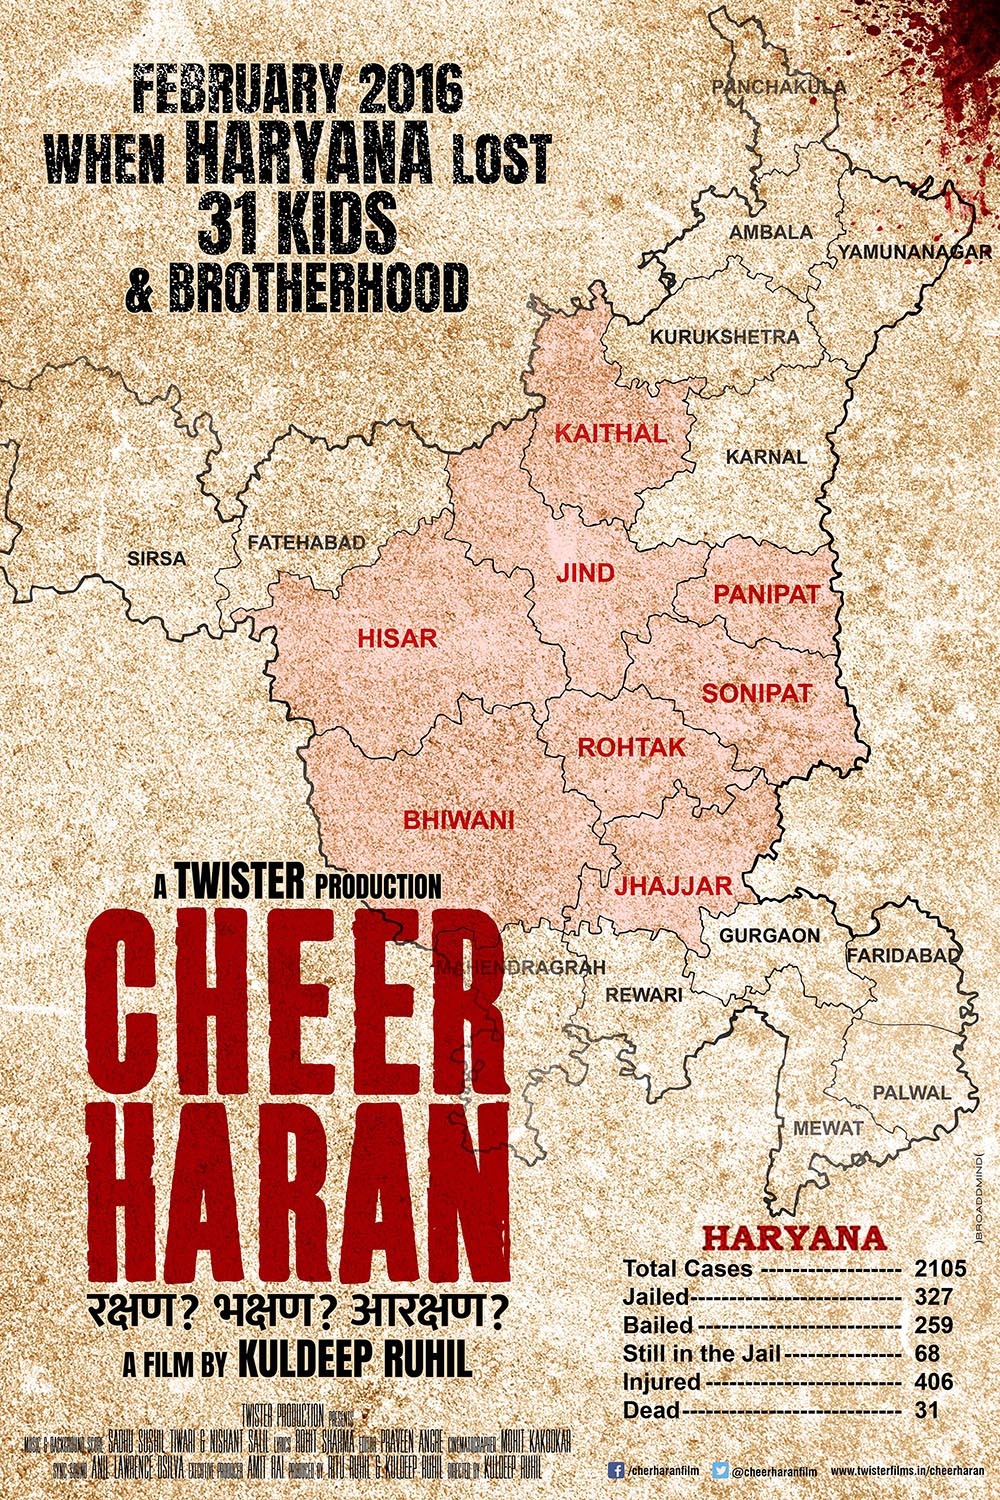 Extra Large Movie Poster Image for Cheer Haran (#1 of 2)